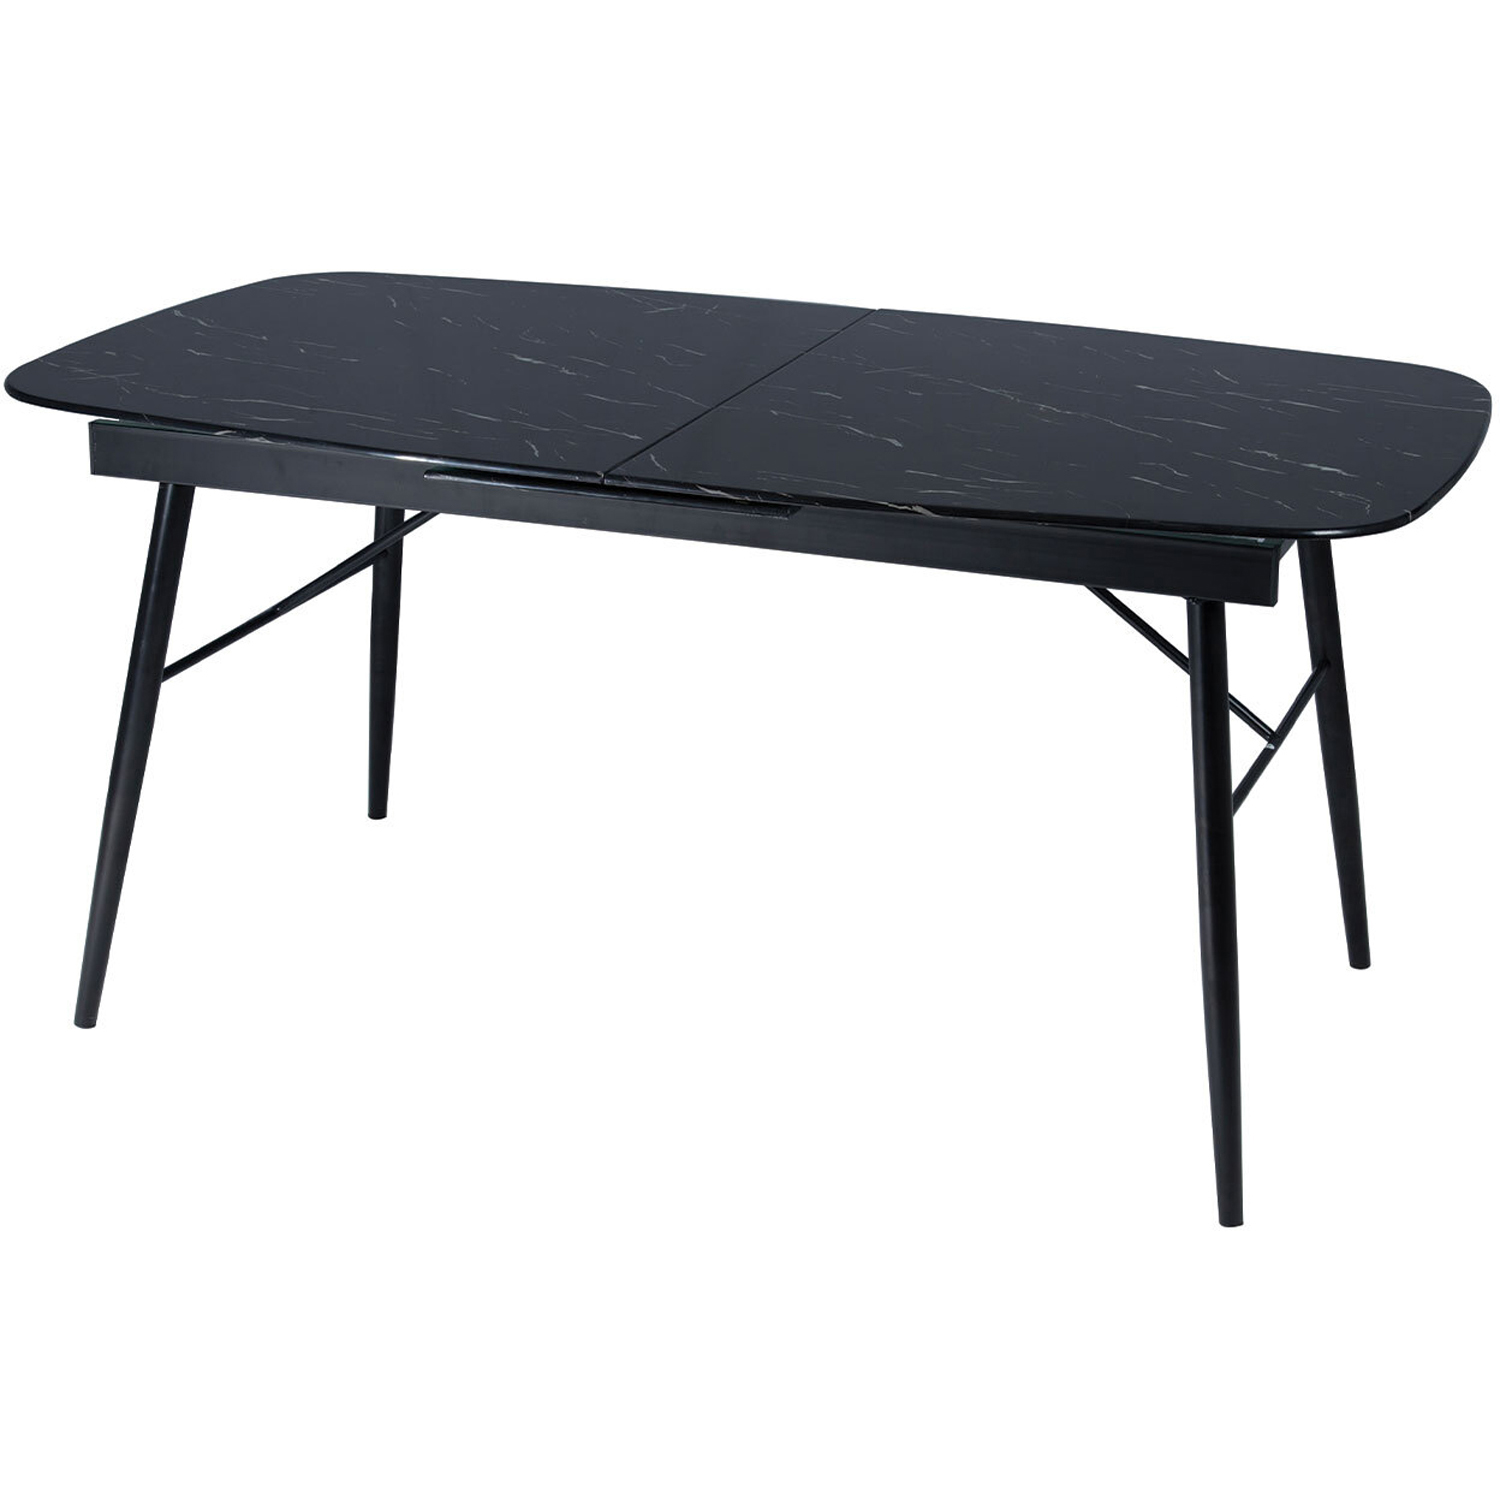 Sorrento Marble 6 Seater 160 to 200cm Extending Dining Table Black Image 4